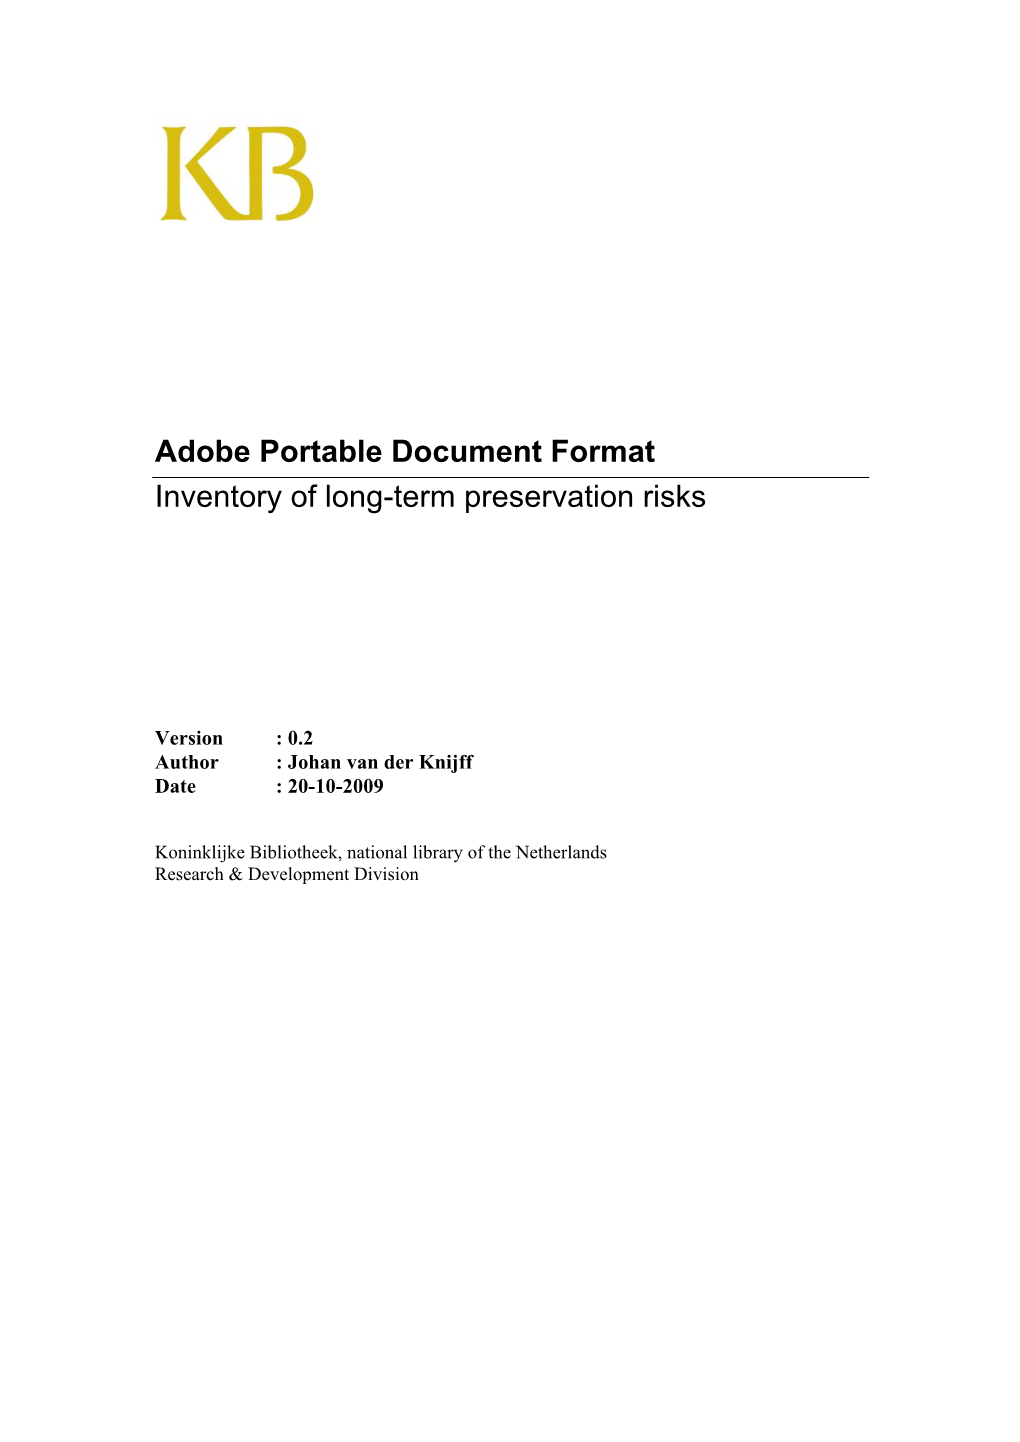 Adobe Portable Document Format Inventory of Long-Term Preservation Risks